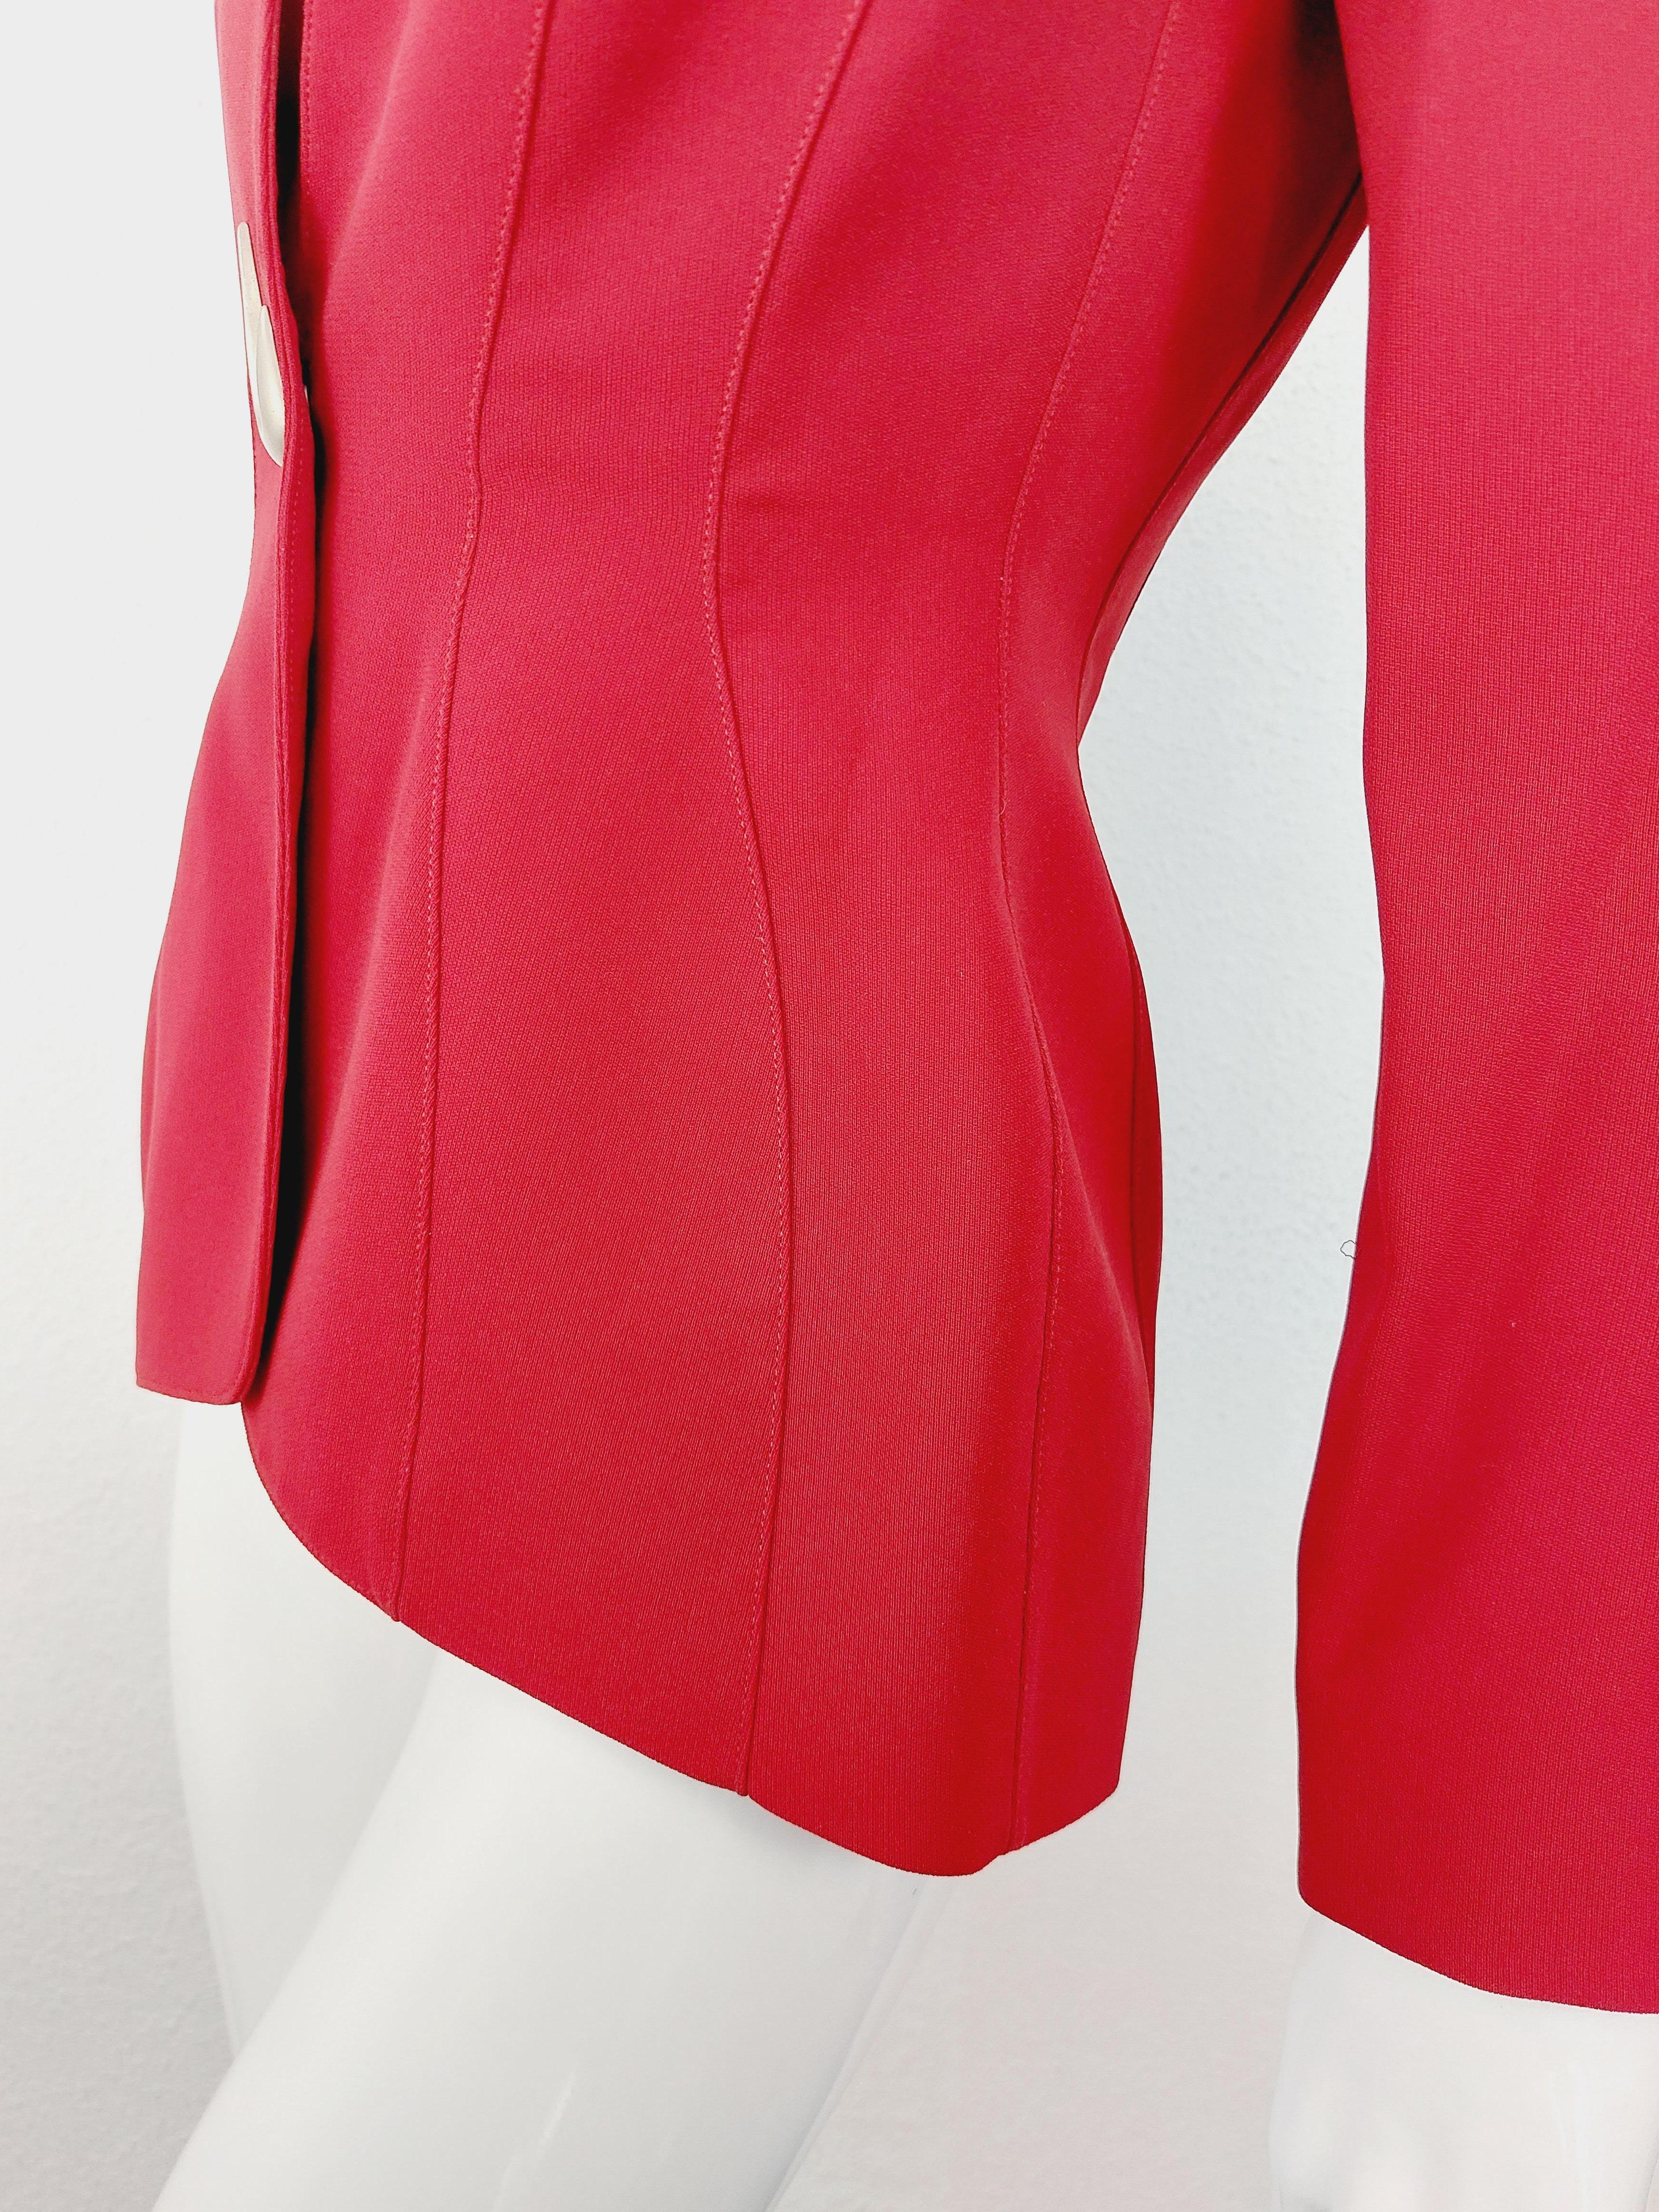 Thierry Mugler Couture 2000 AW Sculptural Red Wasp Pin Brooch Jacket Blazer 6